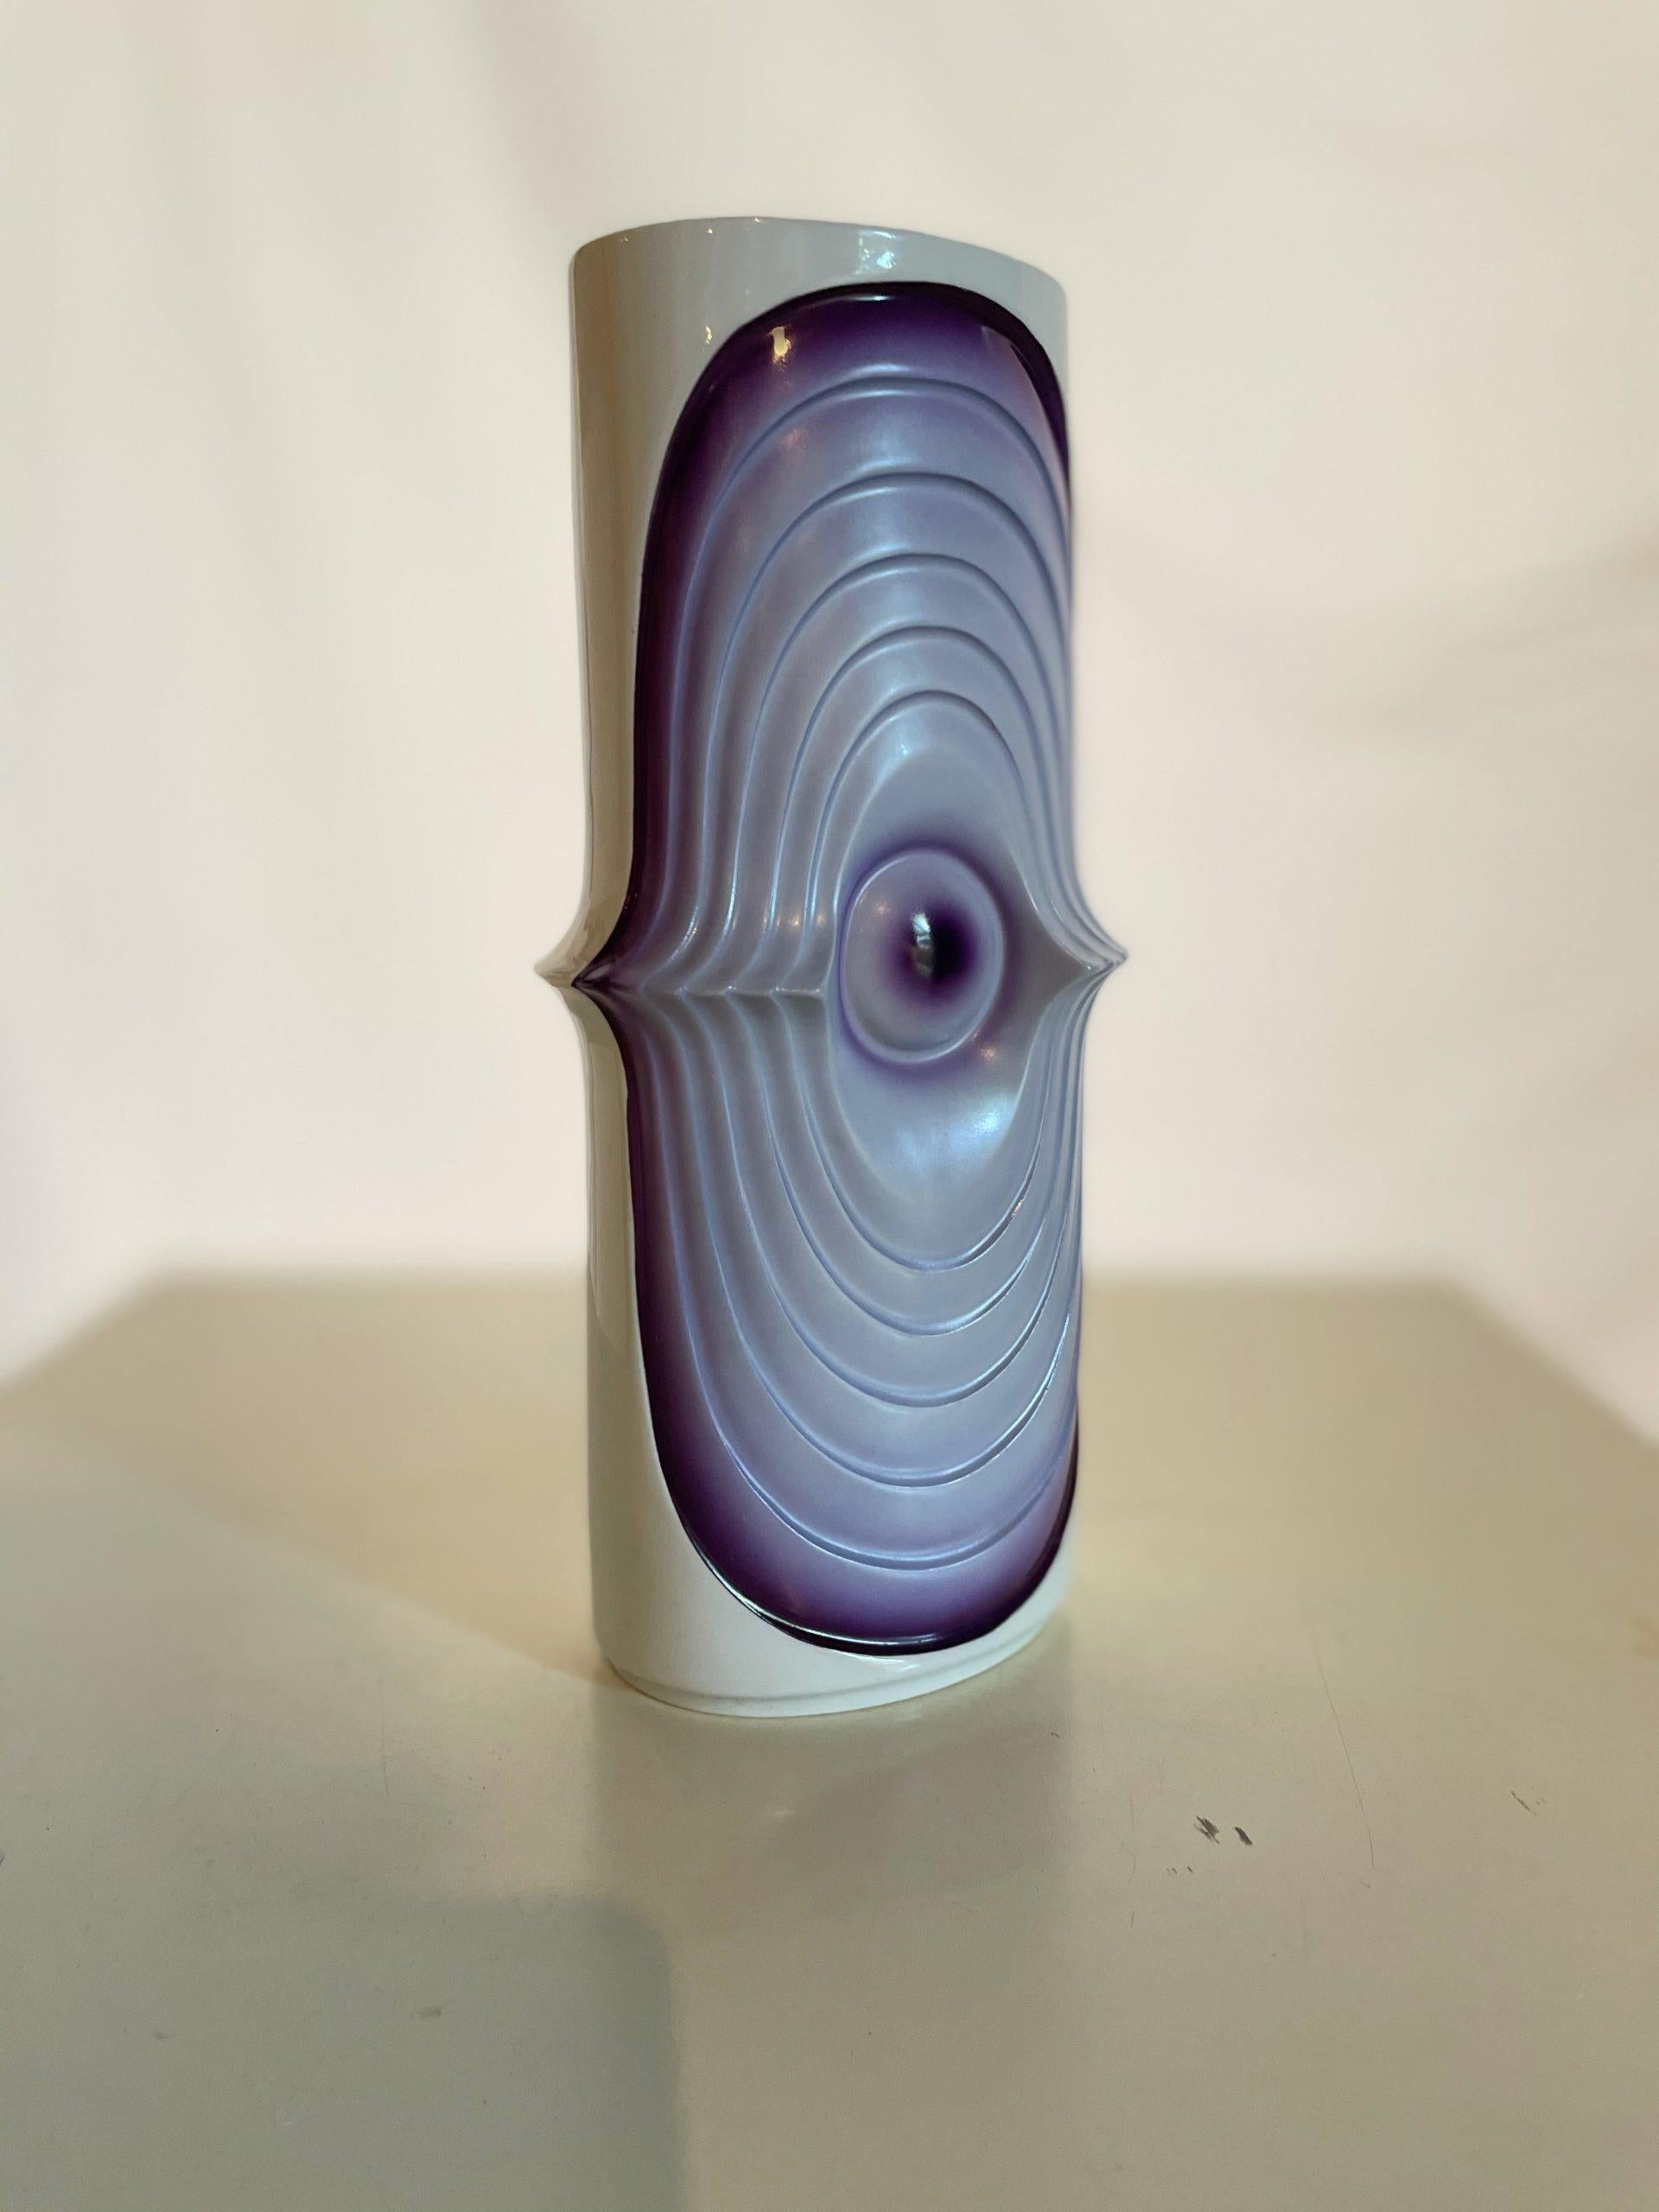 Vase manufactured by KPM Berlin, Germany in the late 1960s.